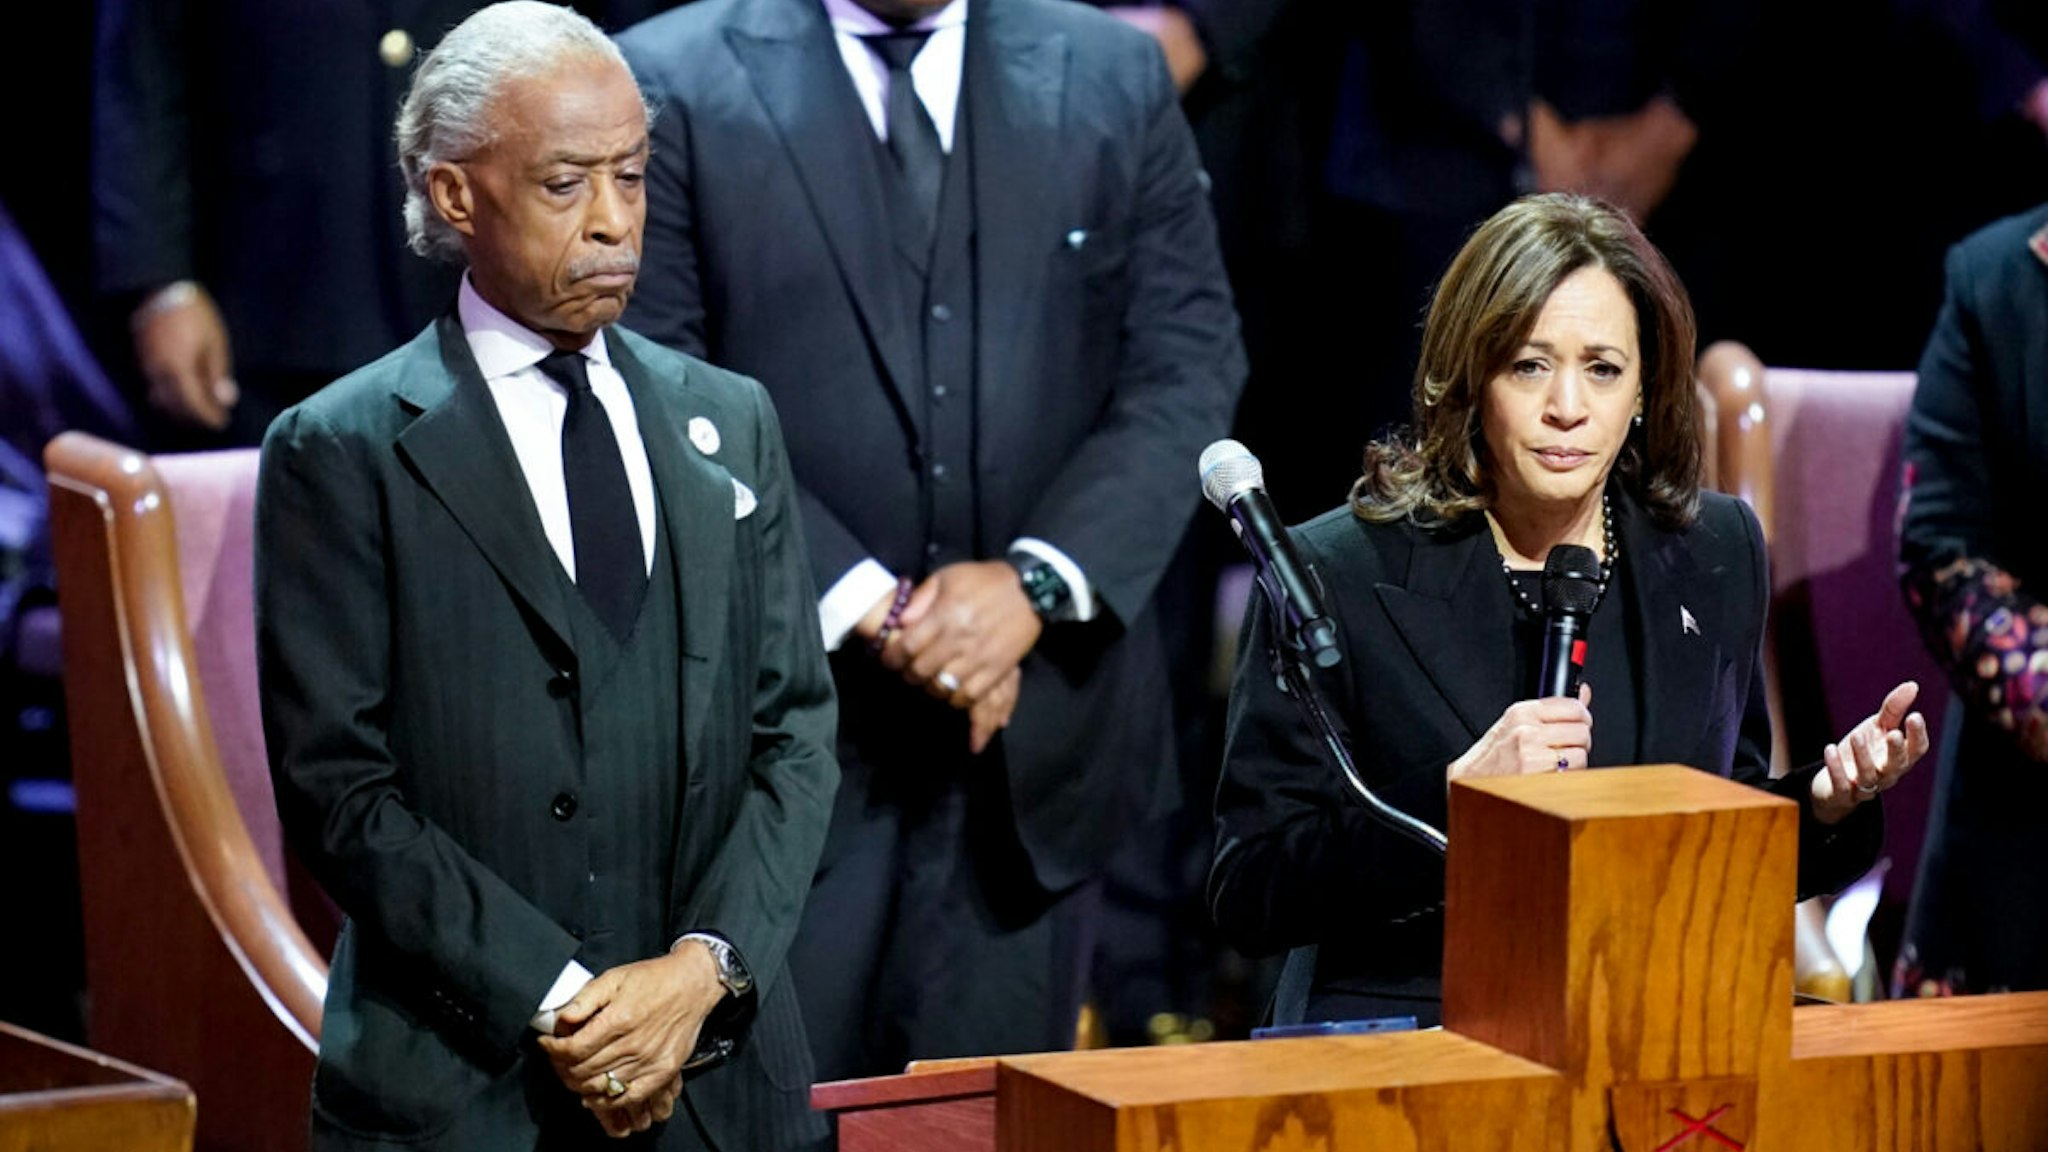 Rev. Al Sharpton listens as US Vice President Kamala Harris speaks during the funeral service for Tyre Nichols at Mississippi Boulevard Christian Church on February 1, 2023 in Memphis, Tennessee.